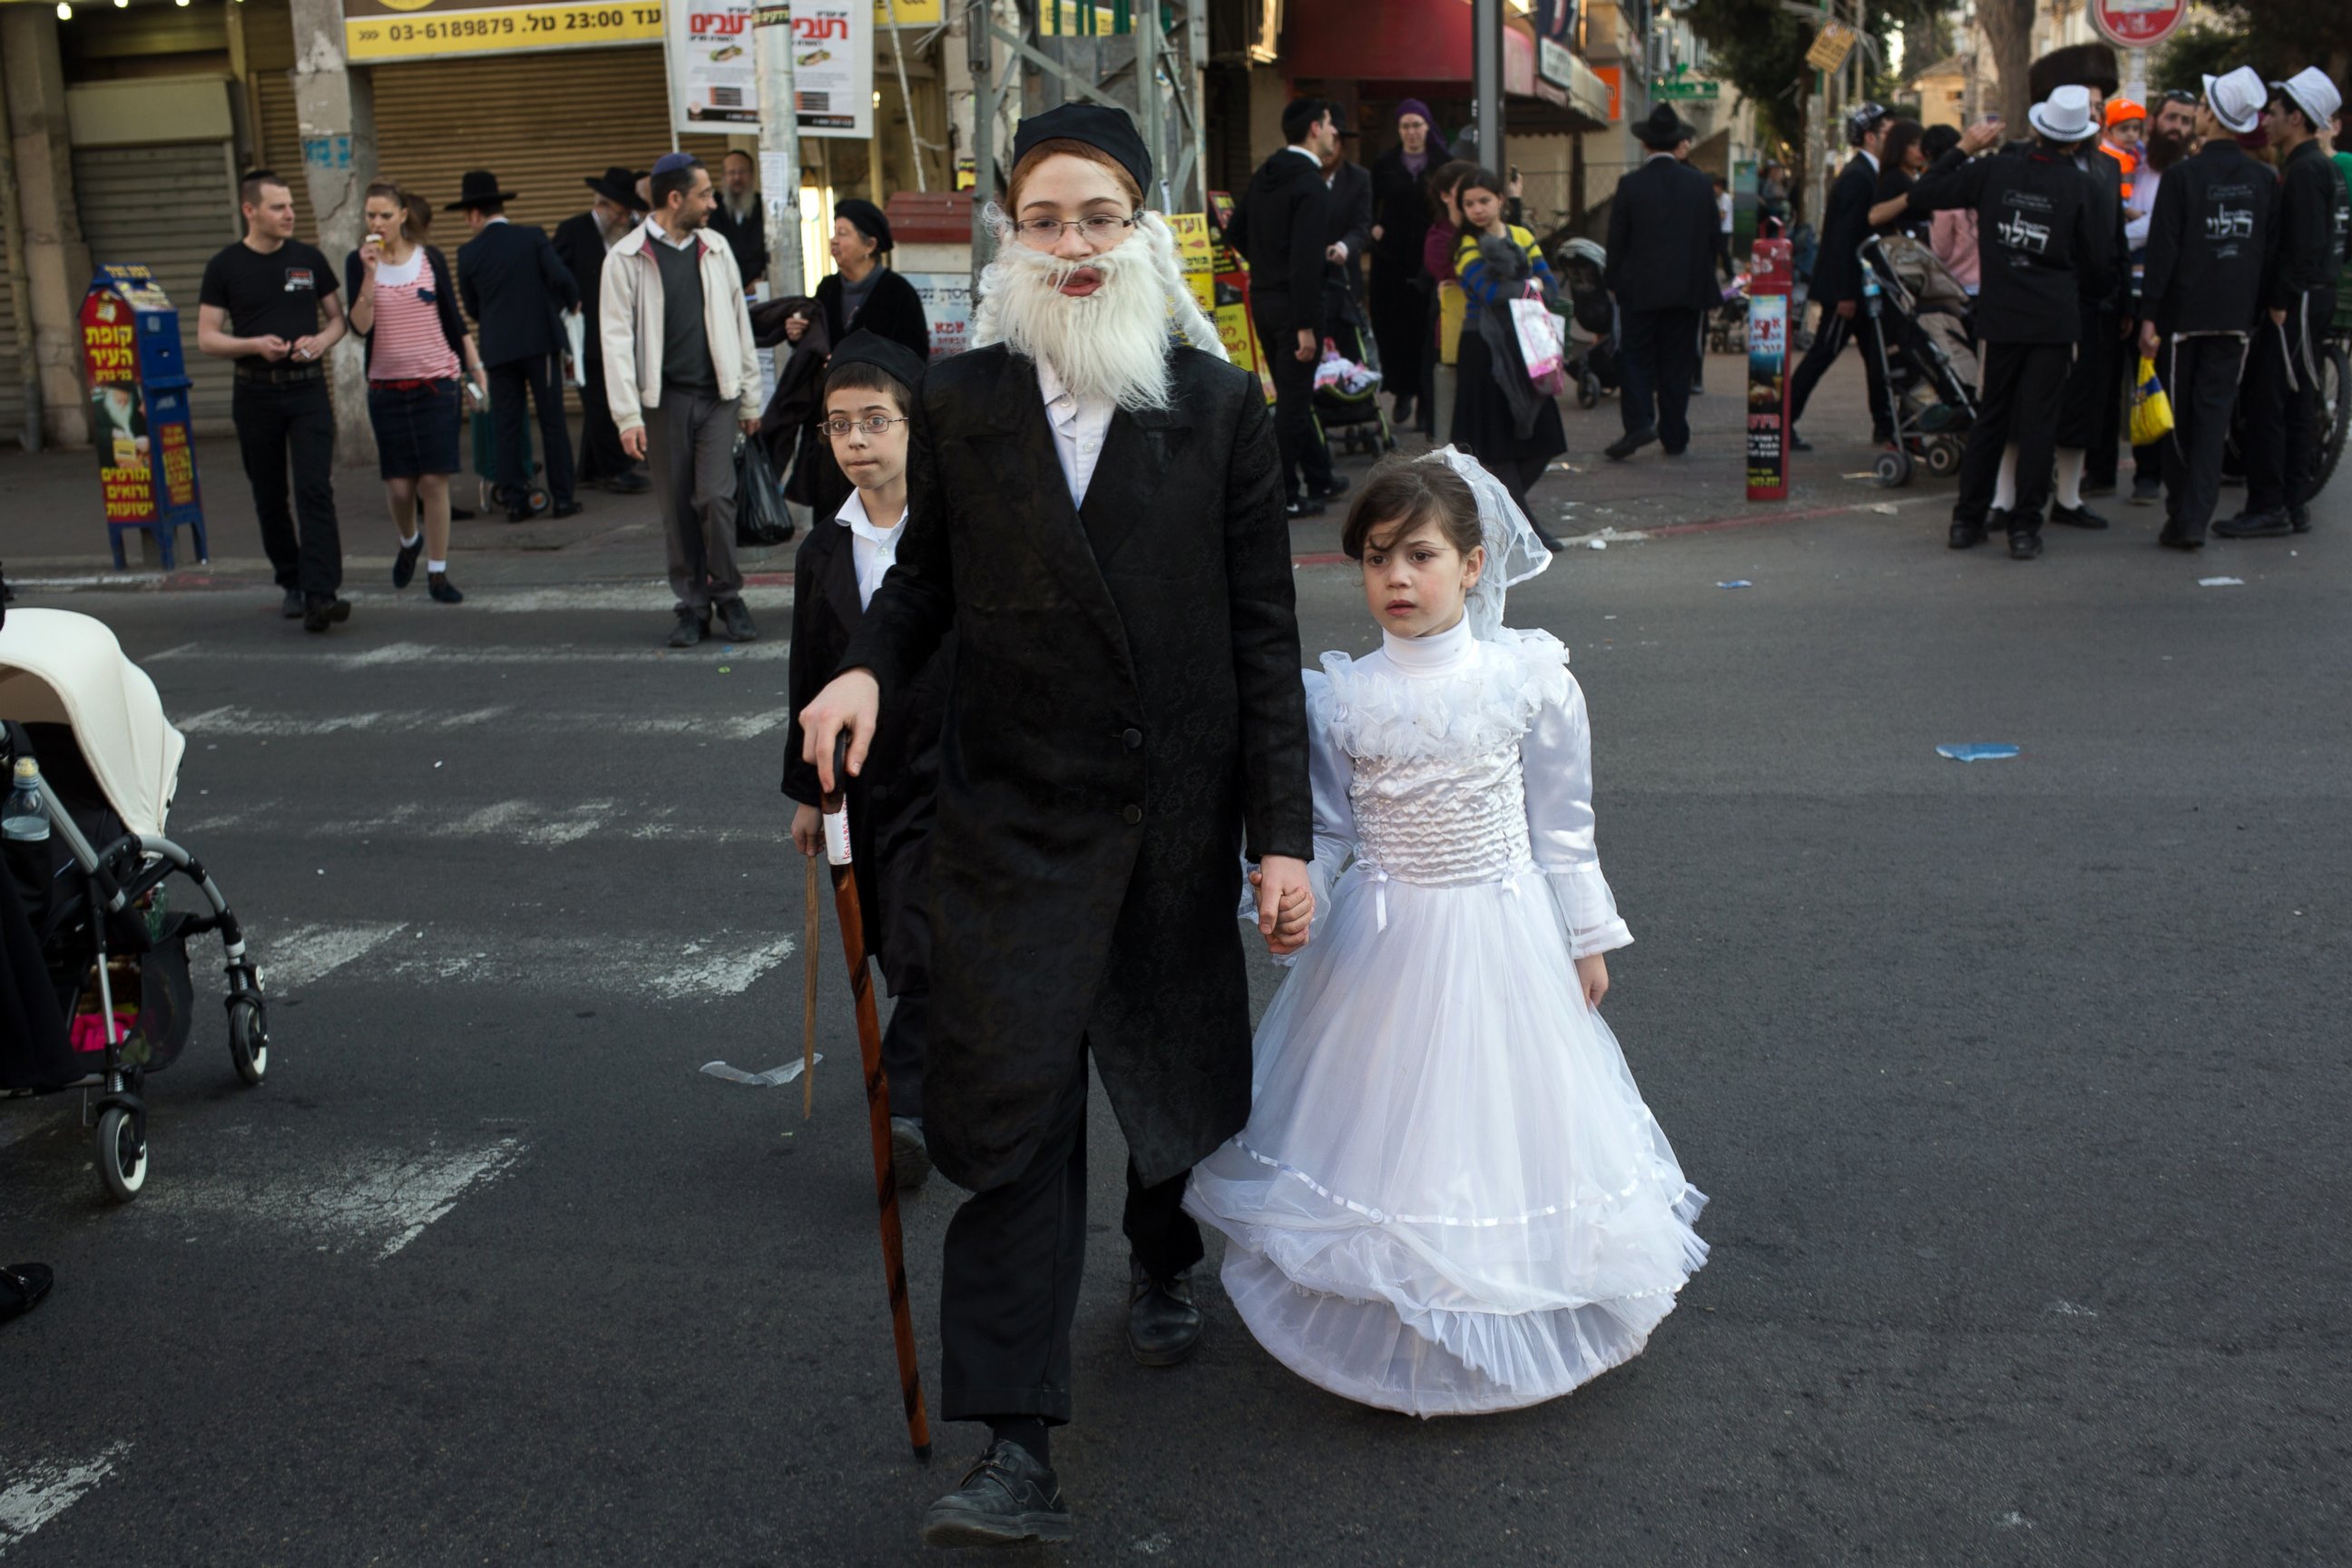 PHOTO: Orthodox Jewish children are pictured wearing costumes during the feast of Purim in the Israeli city of Bnei Brak, near the coastal city of Tel Aviv, on March 5, 2015. 